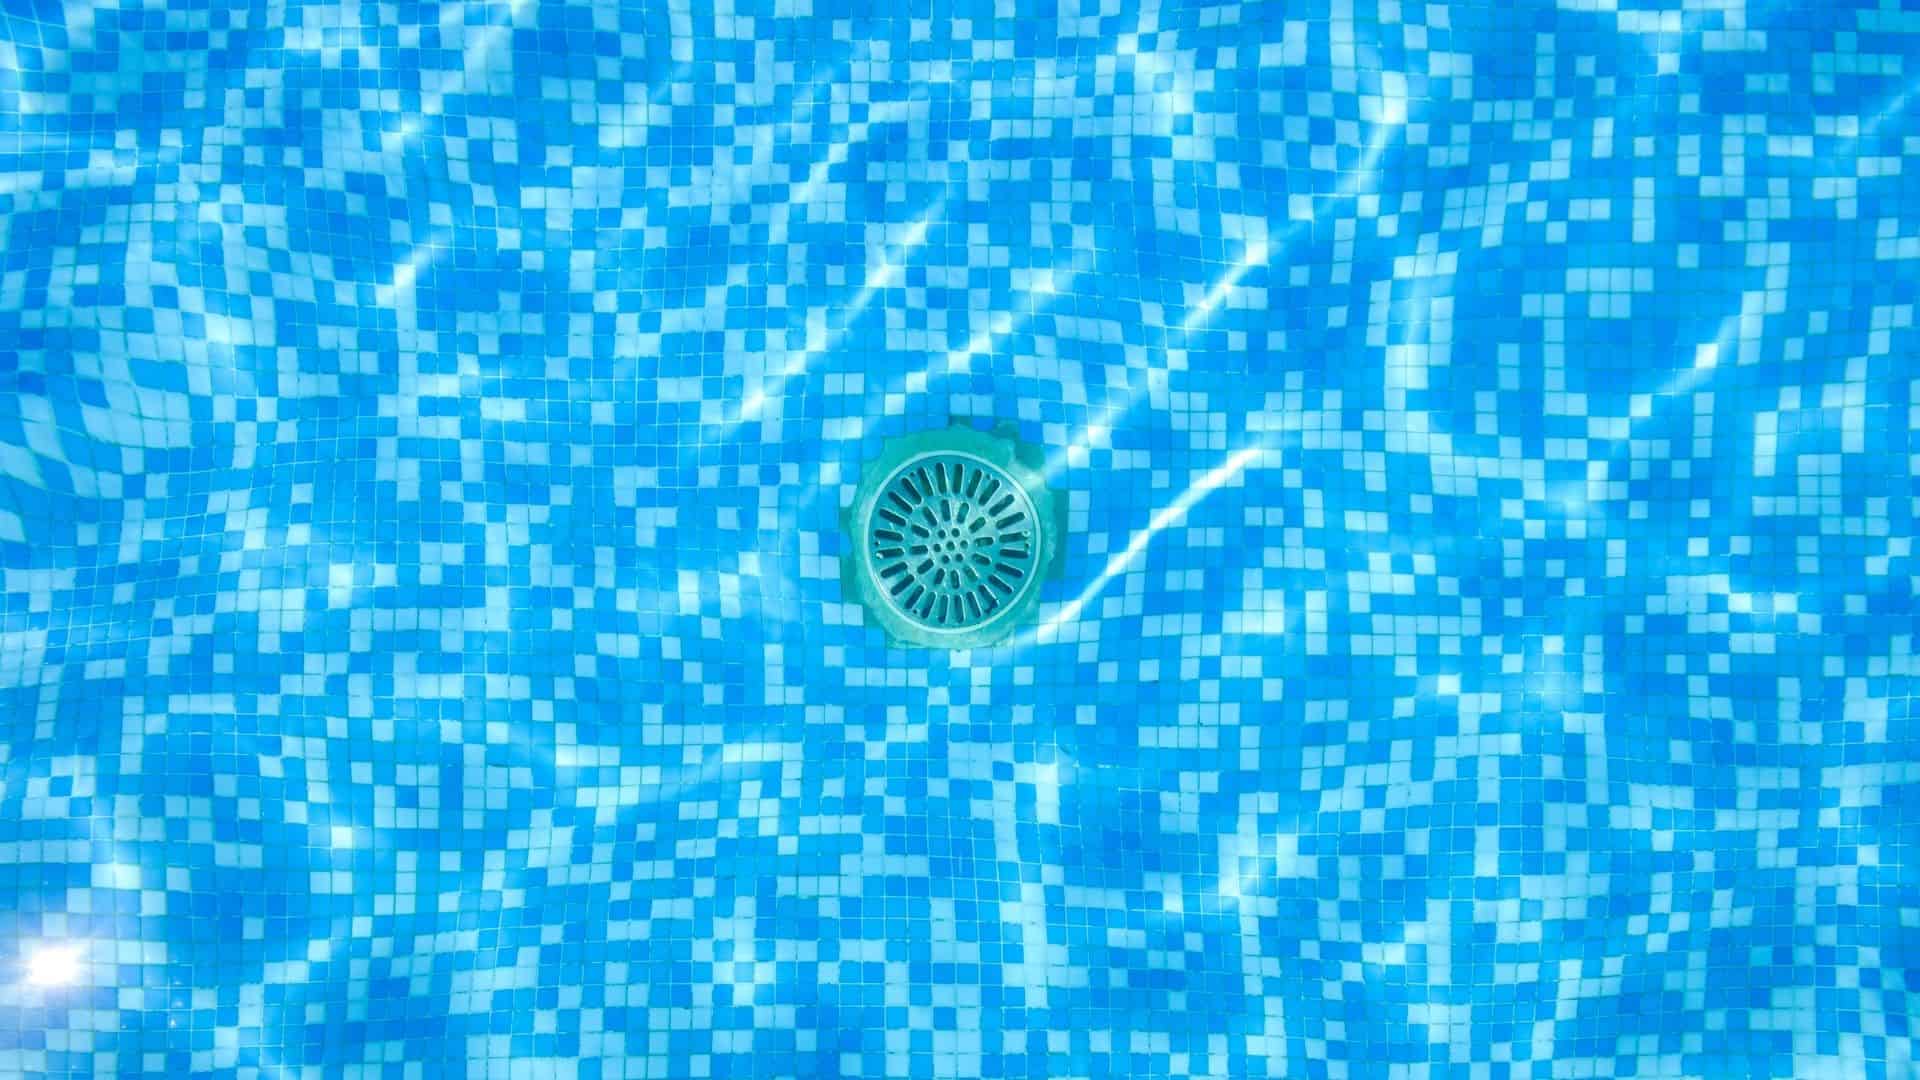 Should a Pool Main Drain Be Open or Closed?